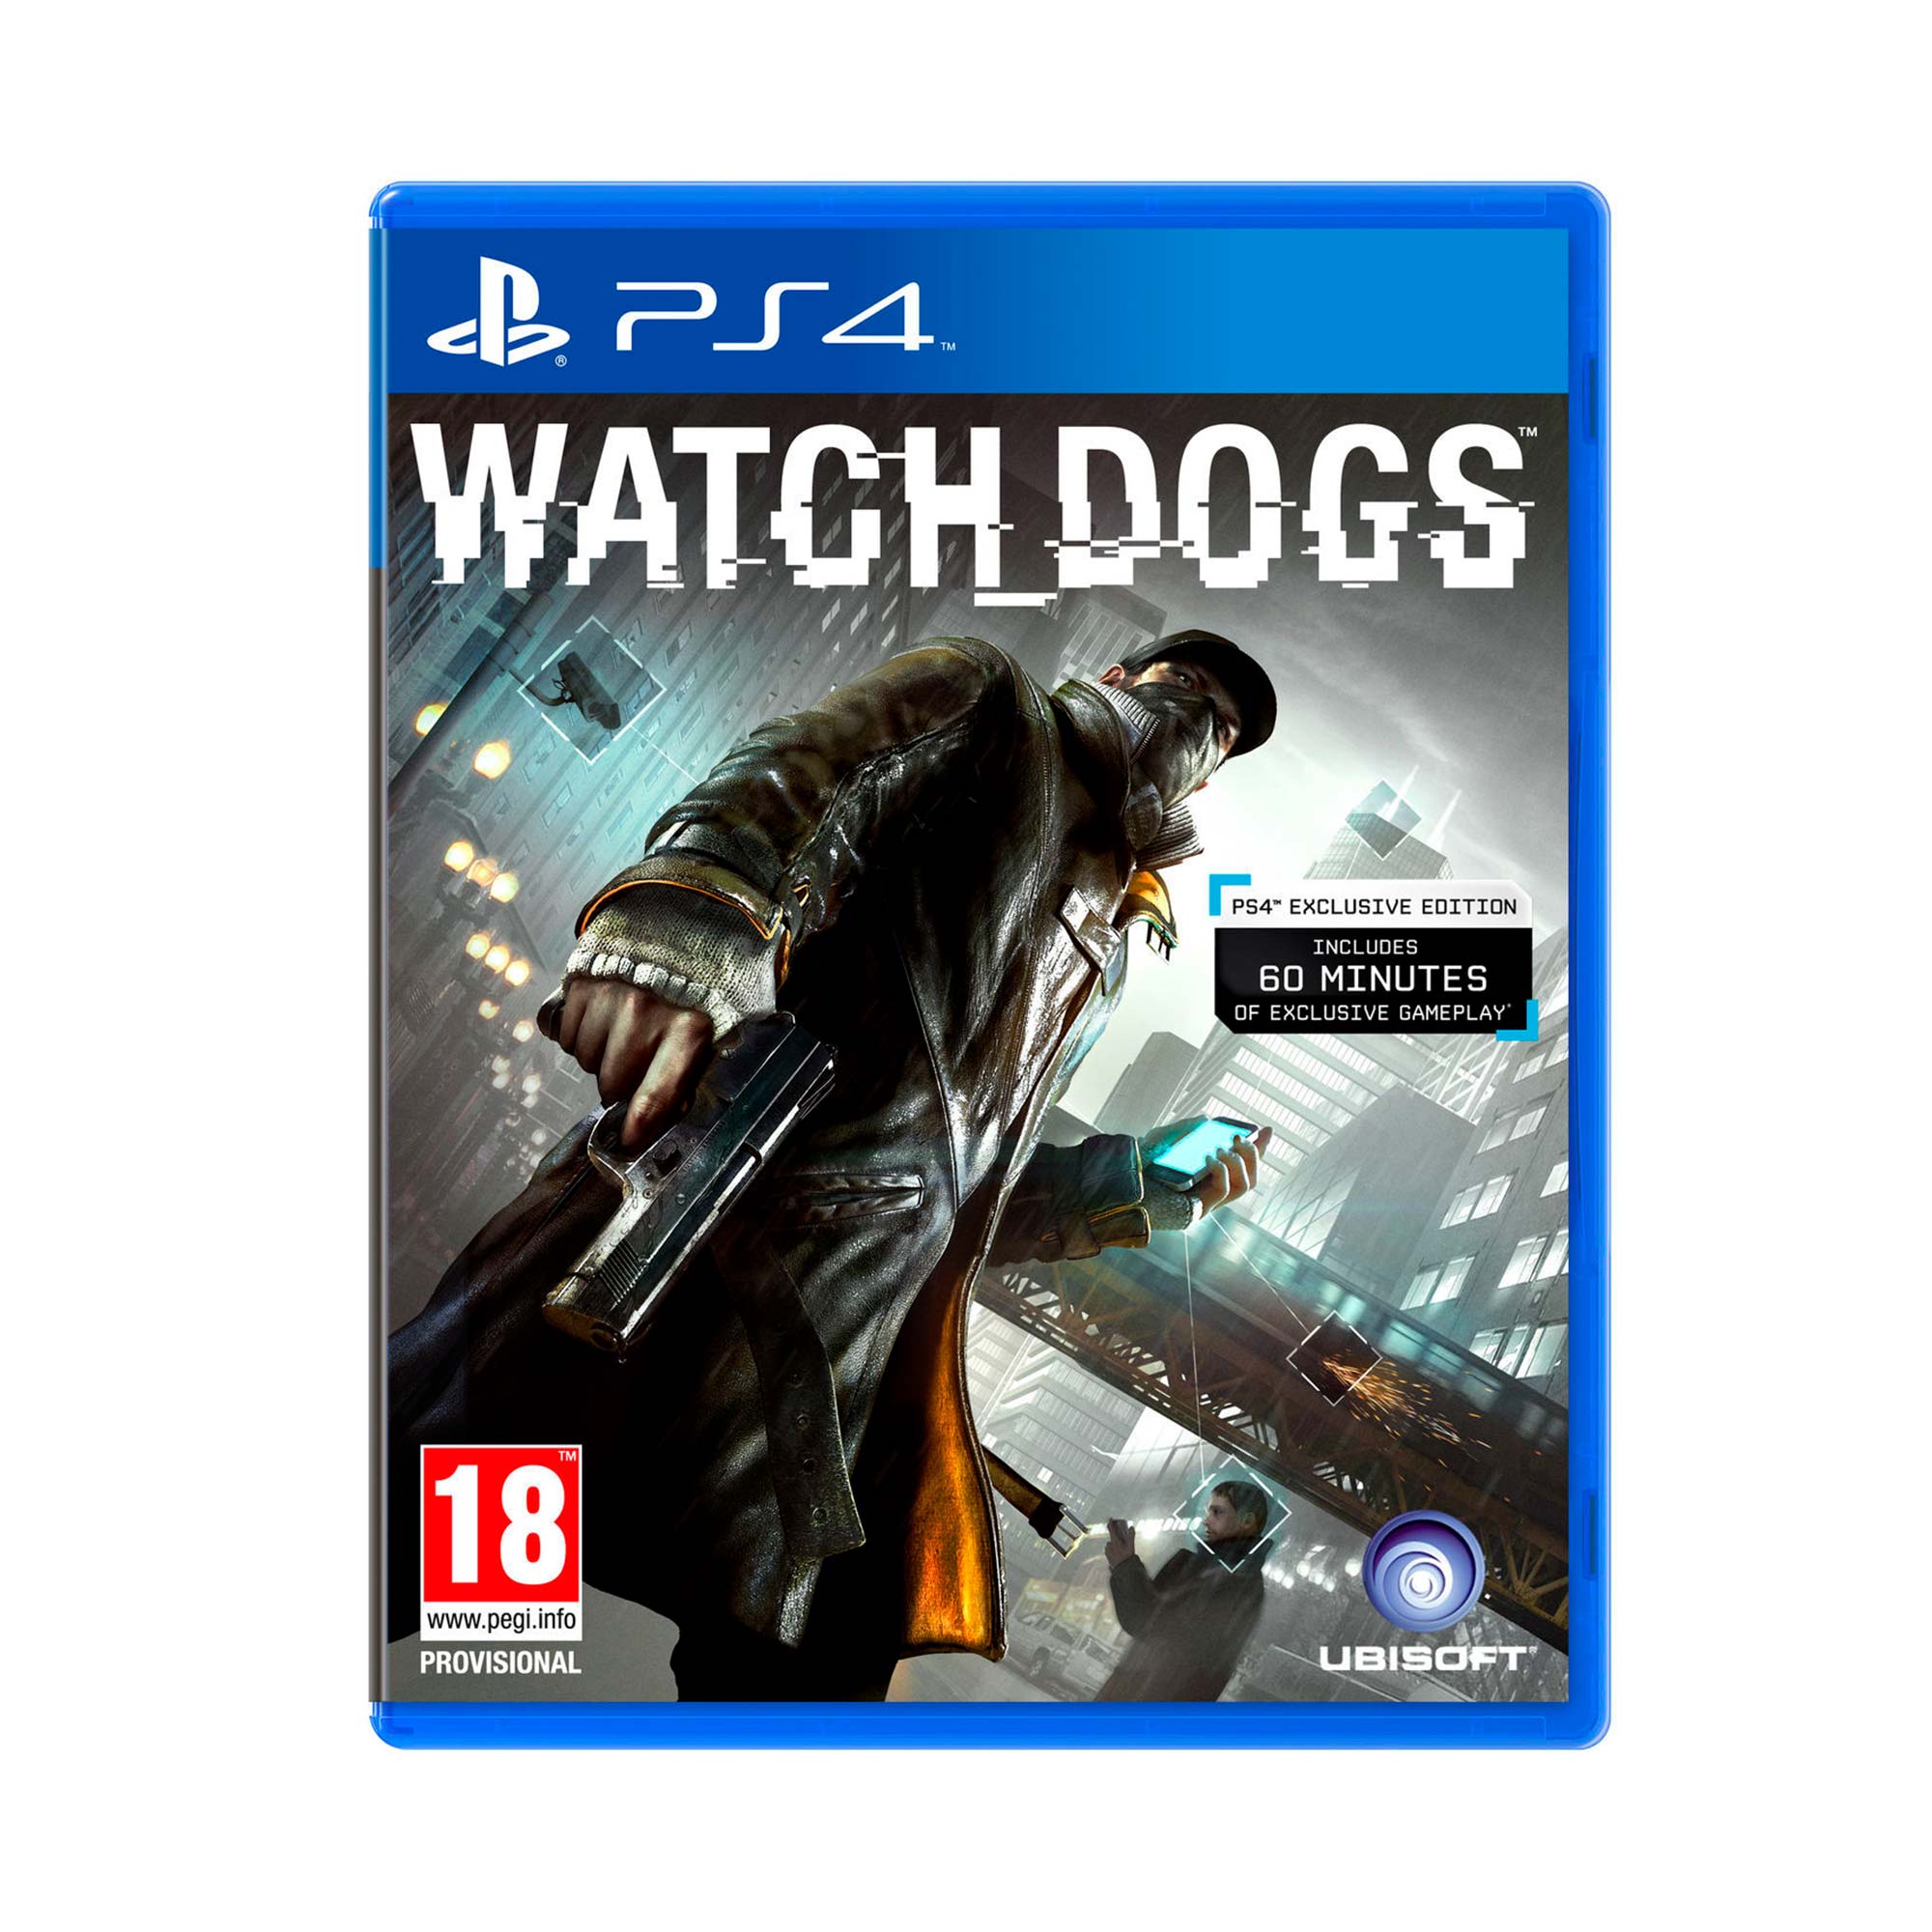 https://stylewatch.vtexassets.com/arquivos/ids/195640/Juego-PS4-Watch-Dogs.jpg?v=637625574853230000